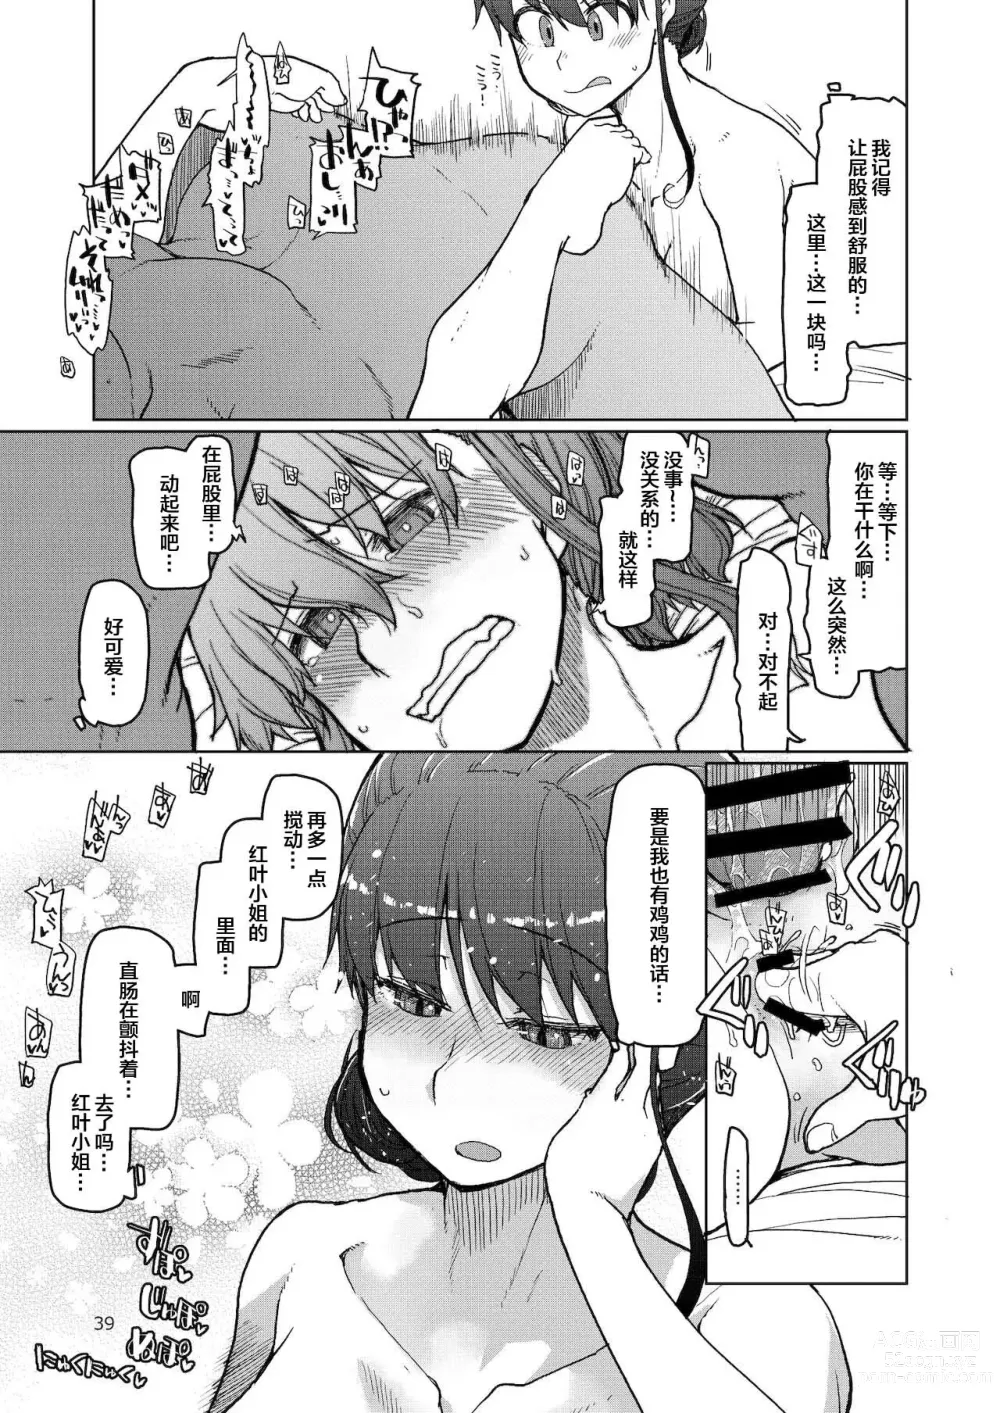 Page 40 of doujinshi SYG -Sell your girlfriend-2